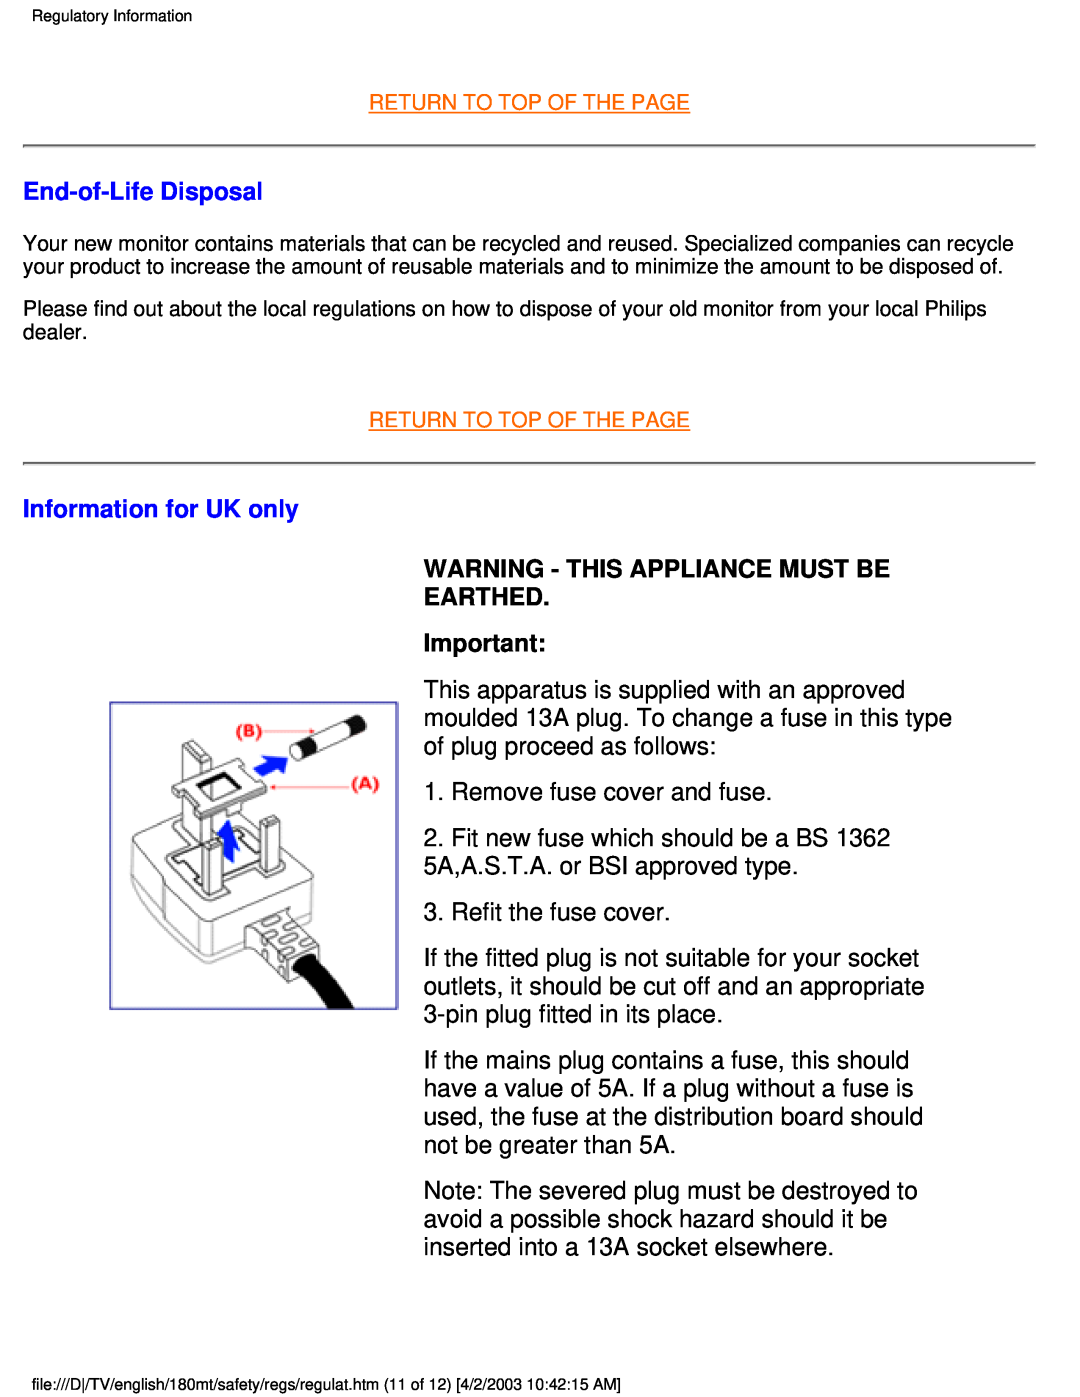 Philips 180MT manual End-of-Life Disposal, Information for UK only, Warning - This Appliance Must Be Earthed 